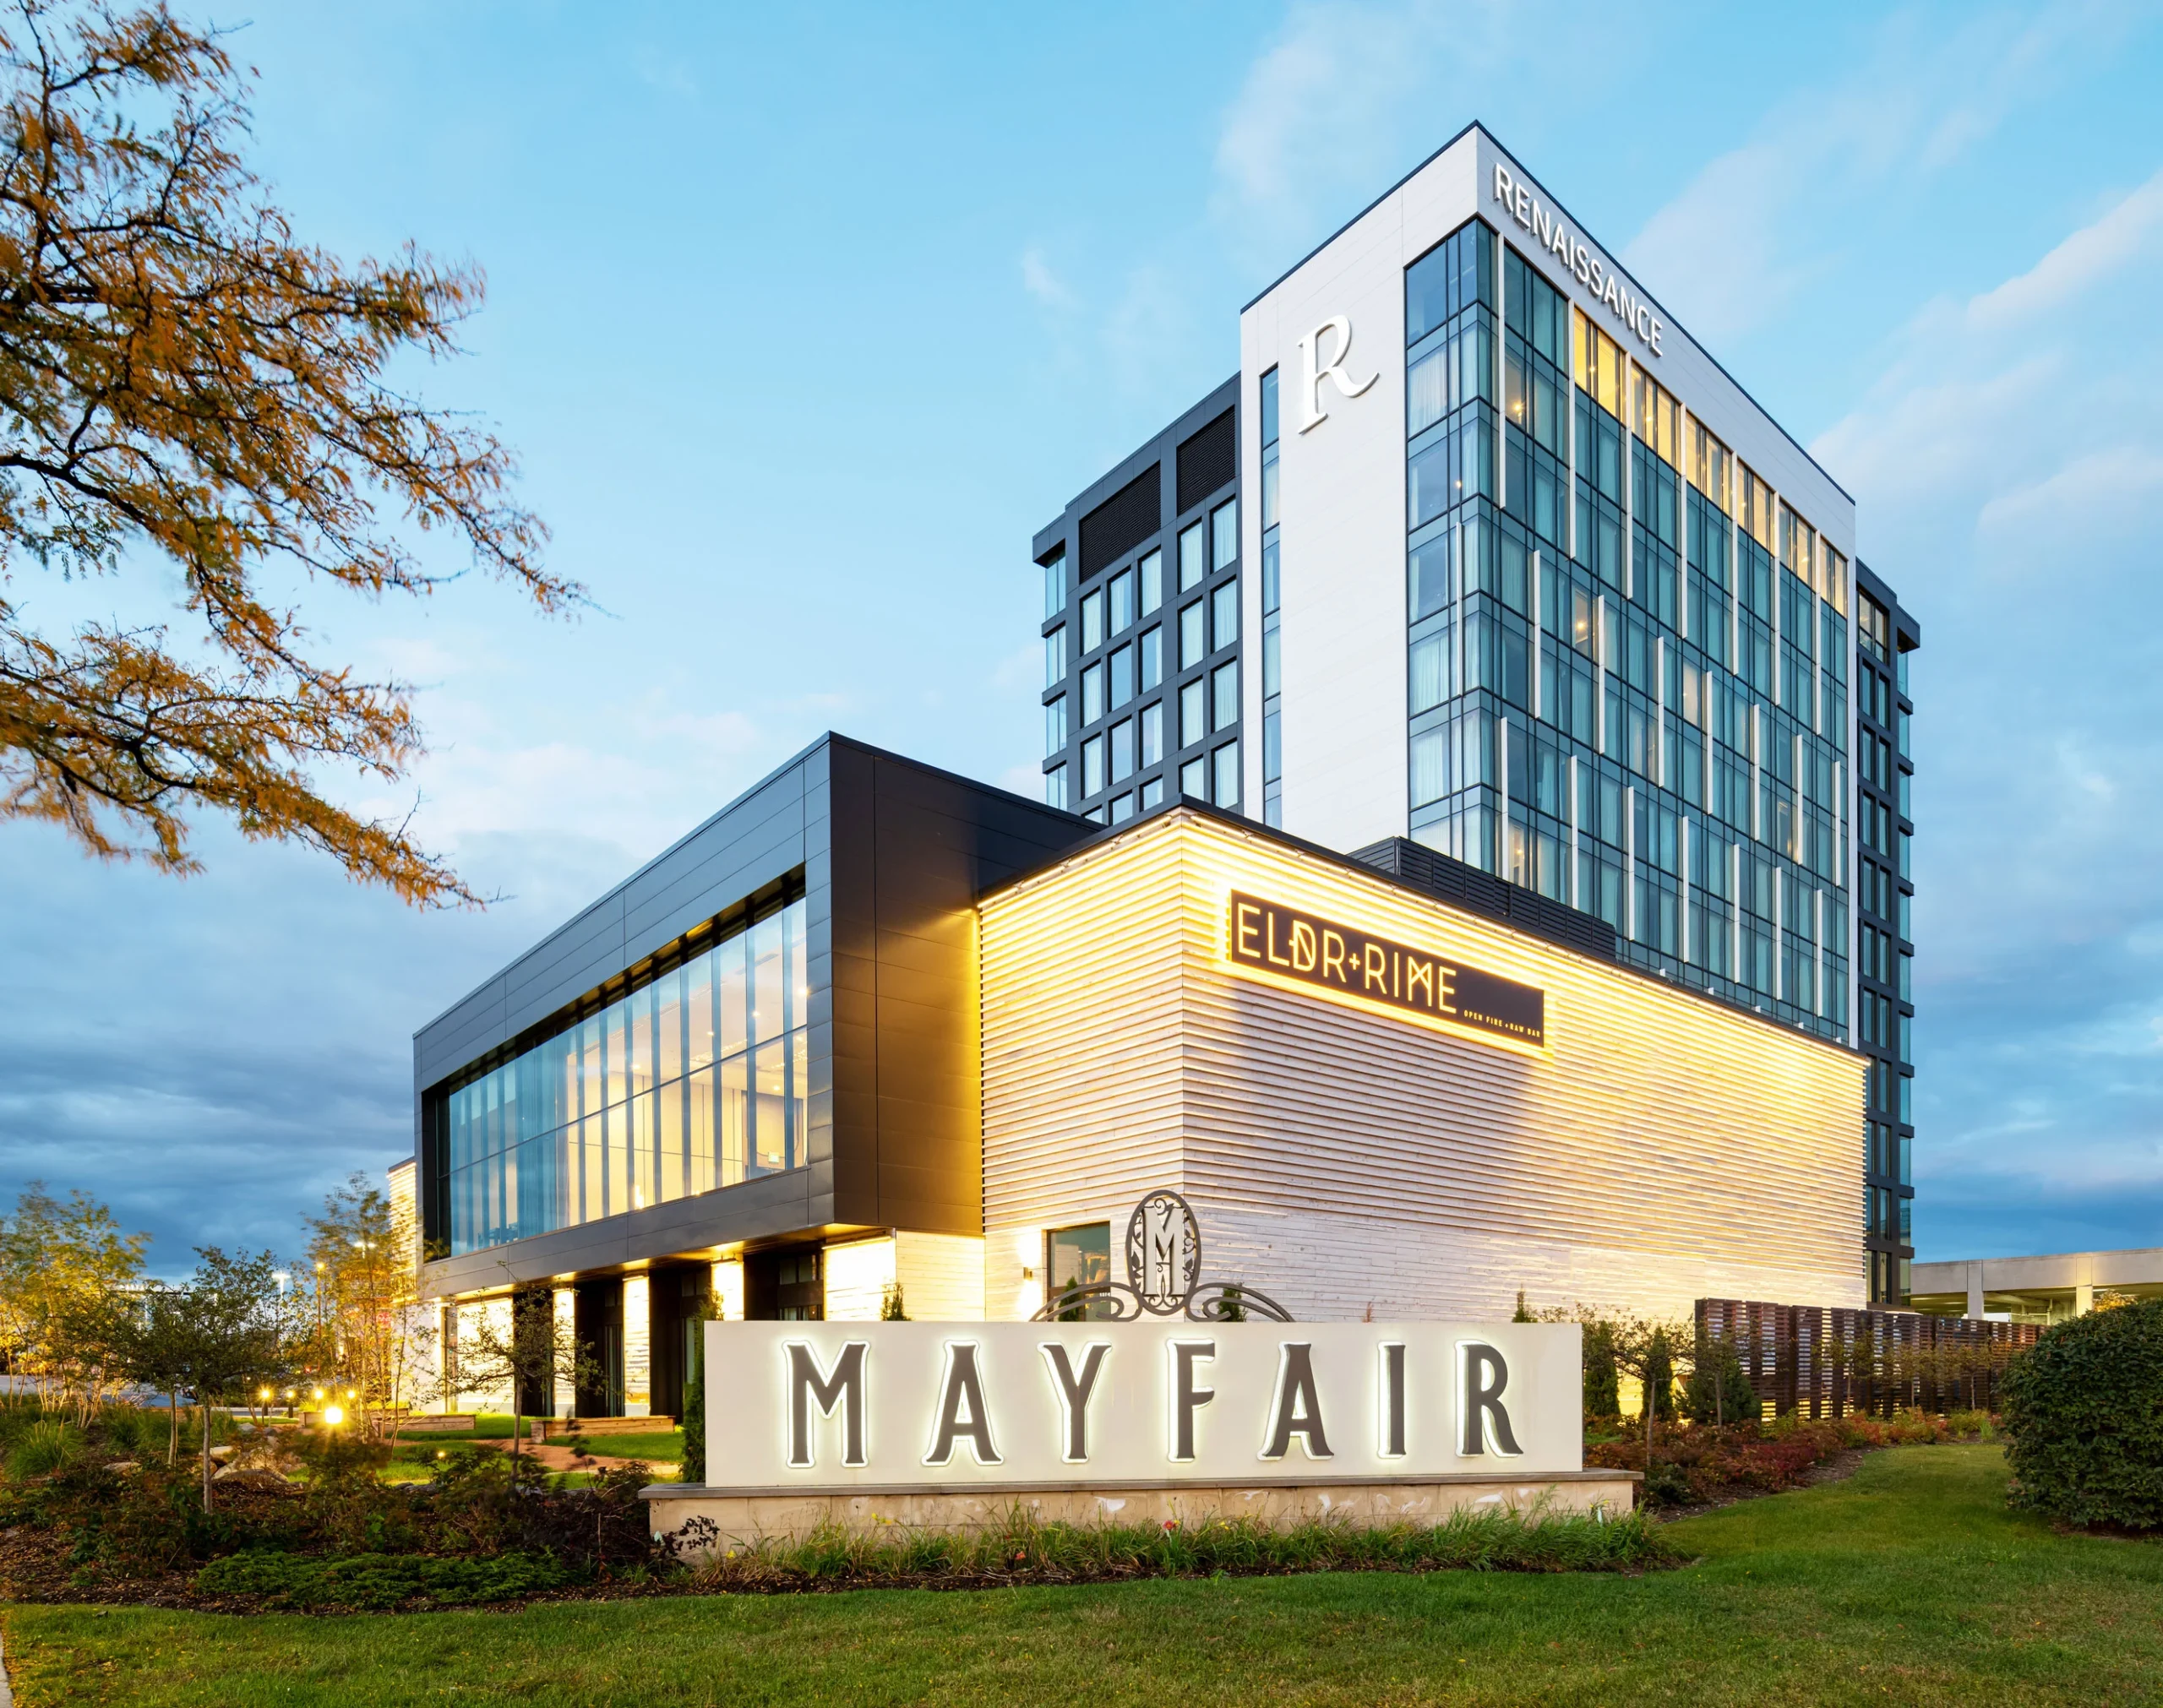 A modern hotel building with large glass windows and angular architecture, featuring signage for "Mayfair" and "Eldr+Rime". The building has a blend of dark and light tones with landscaped greenery in the foreground and a partially cloudy sky above.